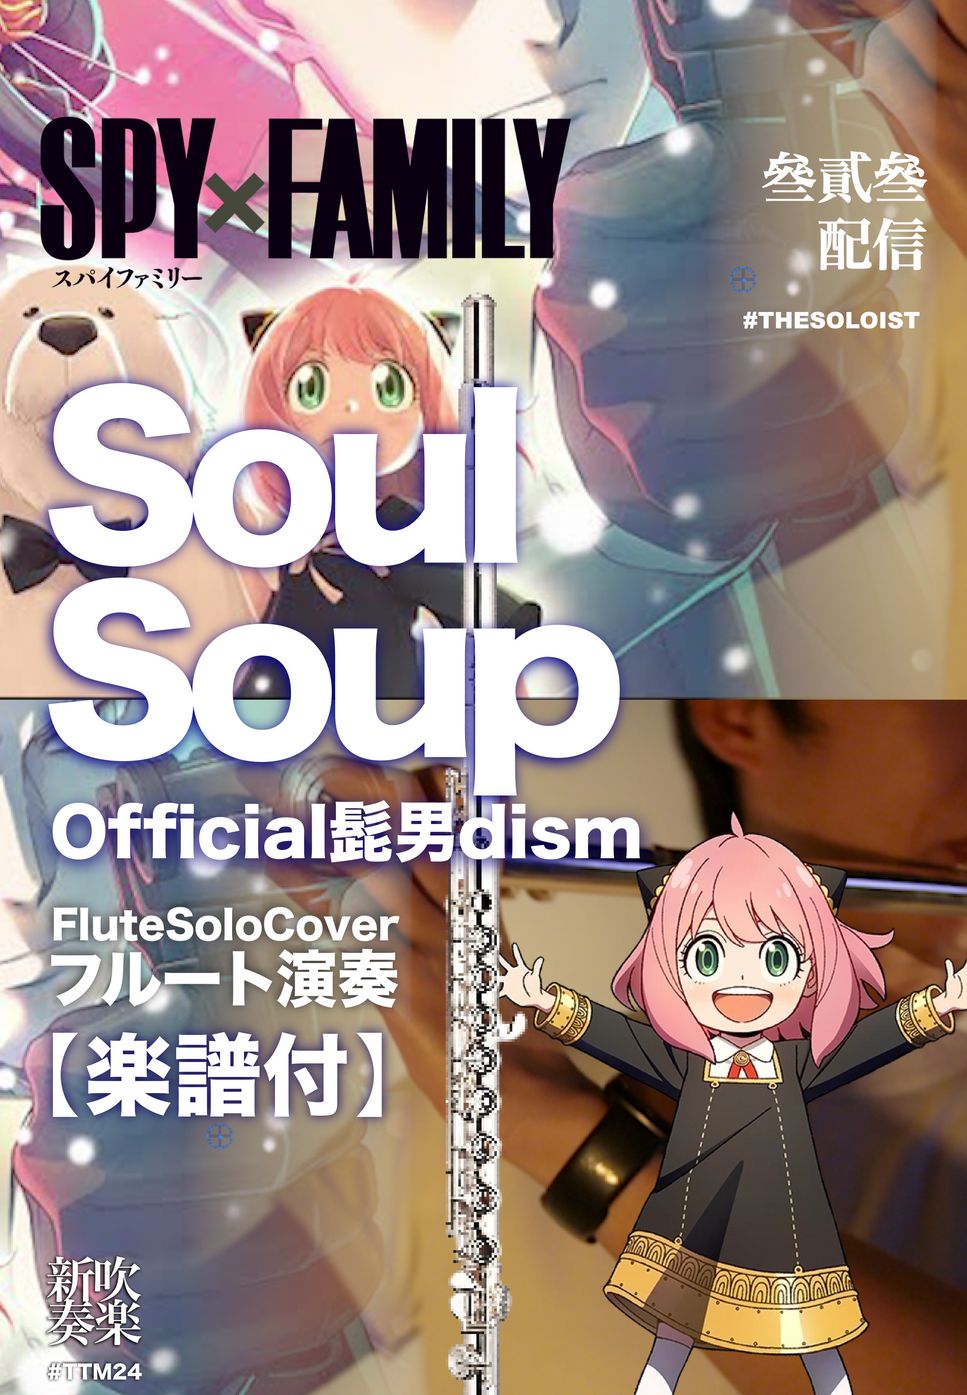 Official髭男dism - Soulsoup (C/ Bb/ F/ Eb Solo Sheet Music) by FungYip